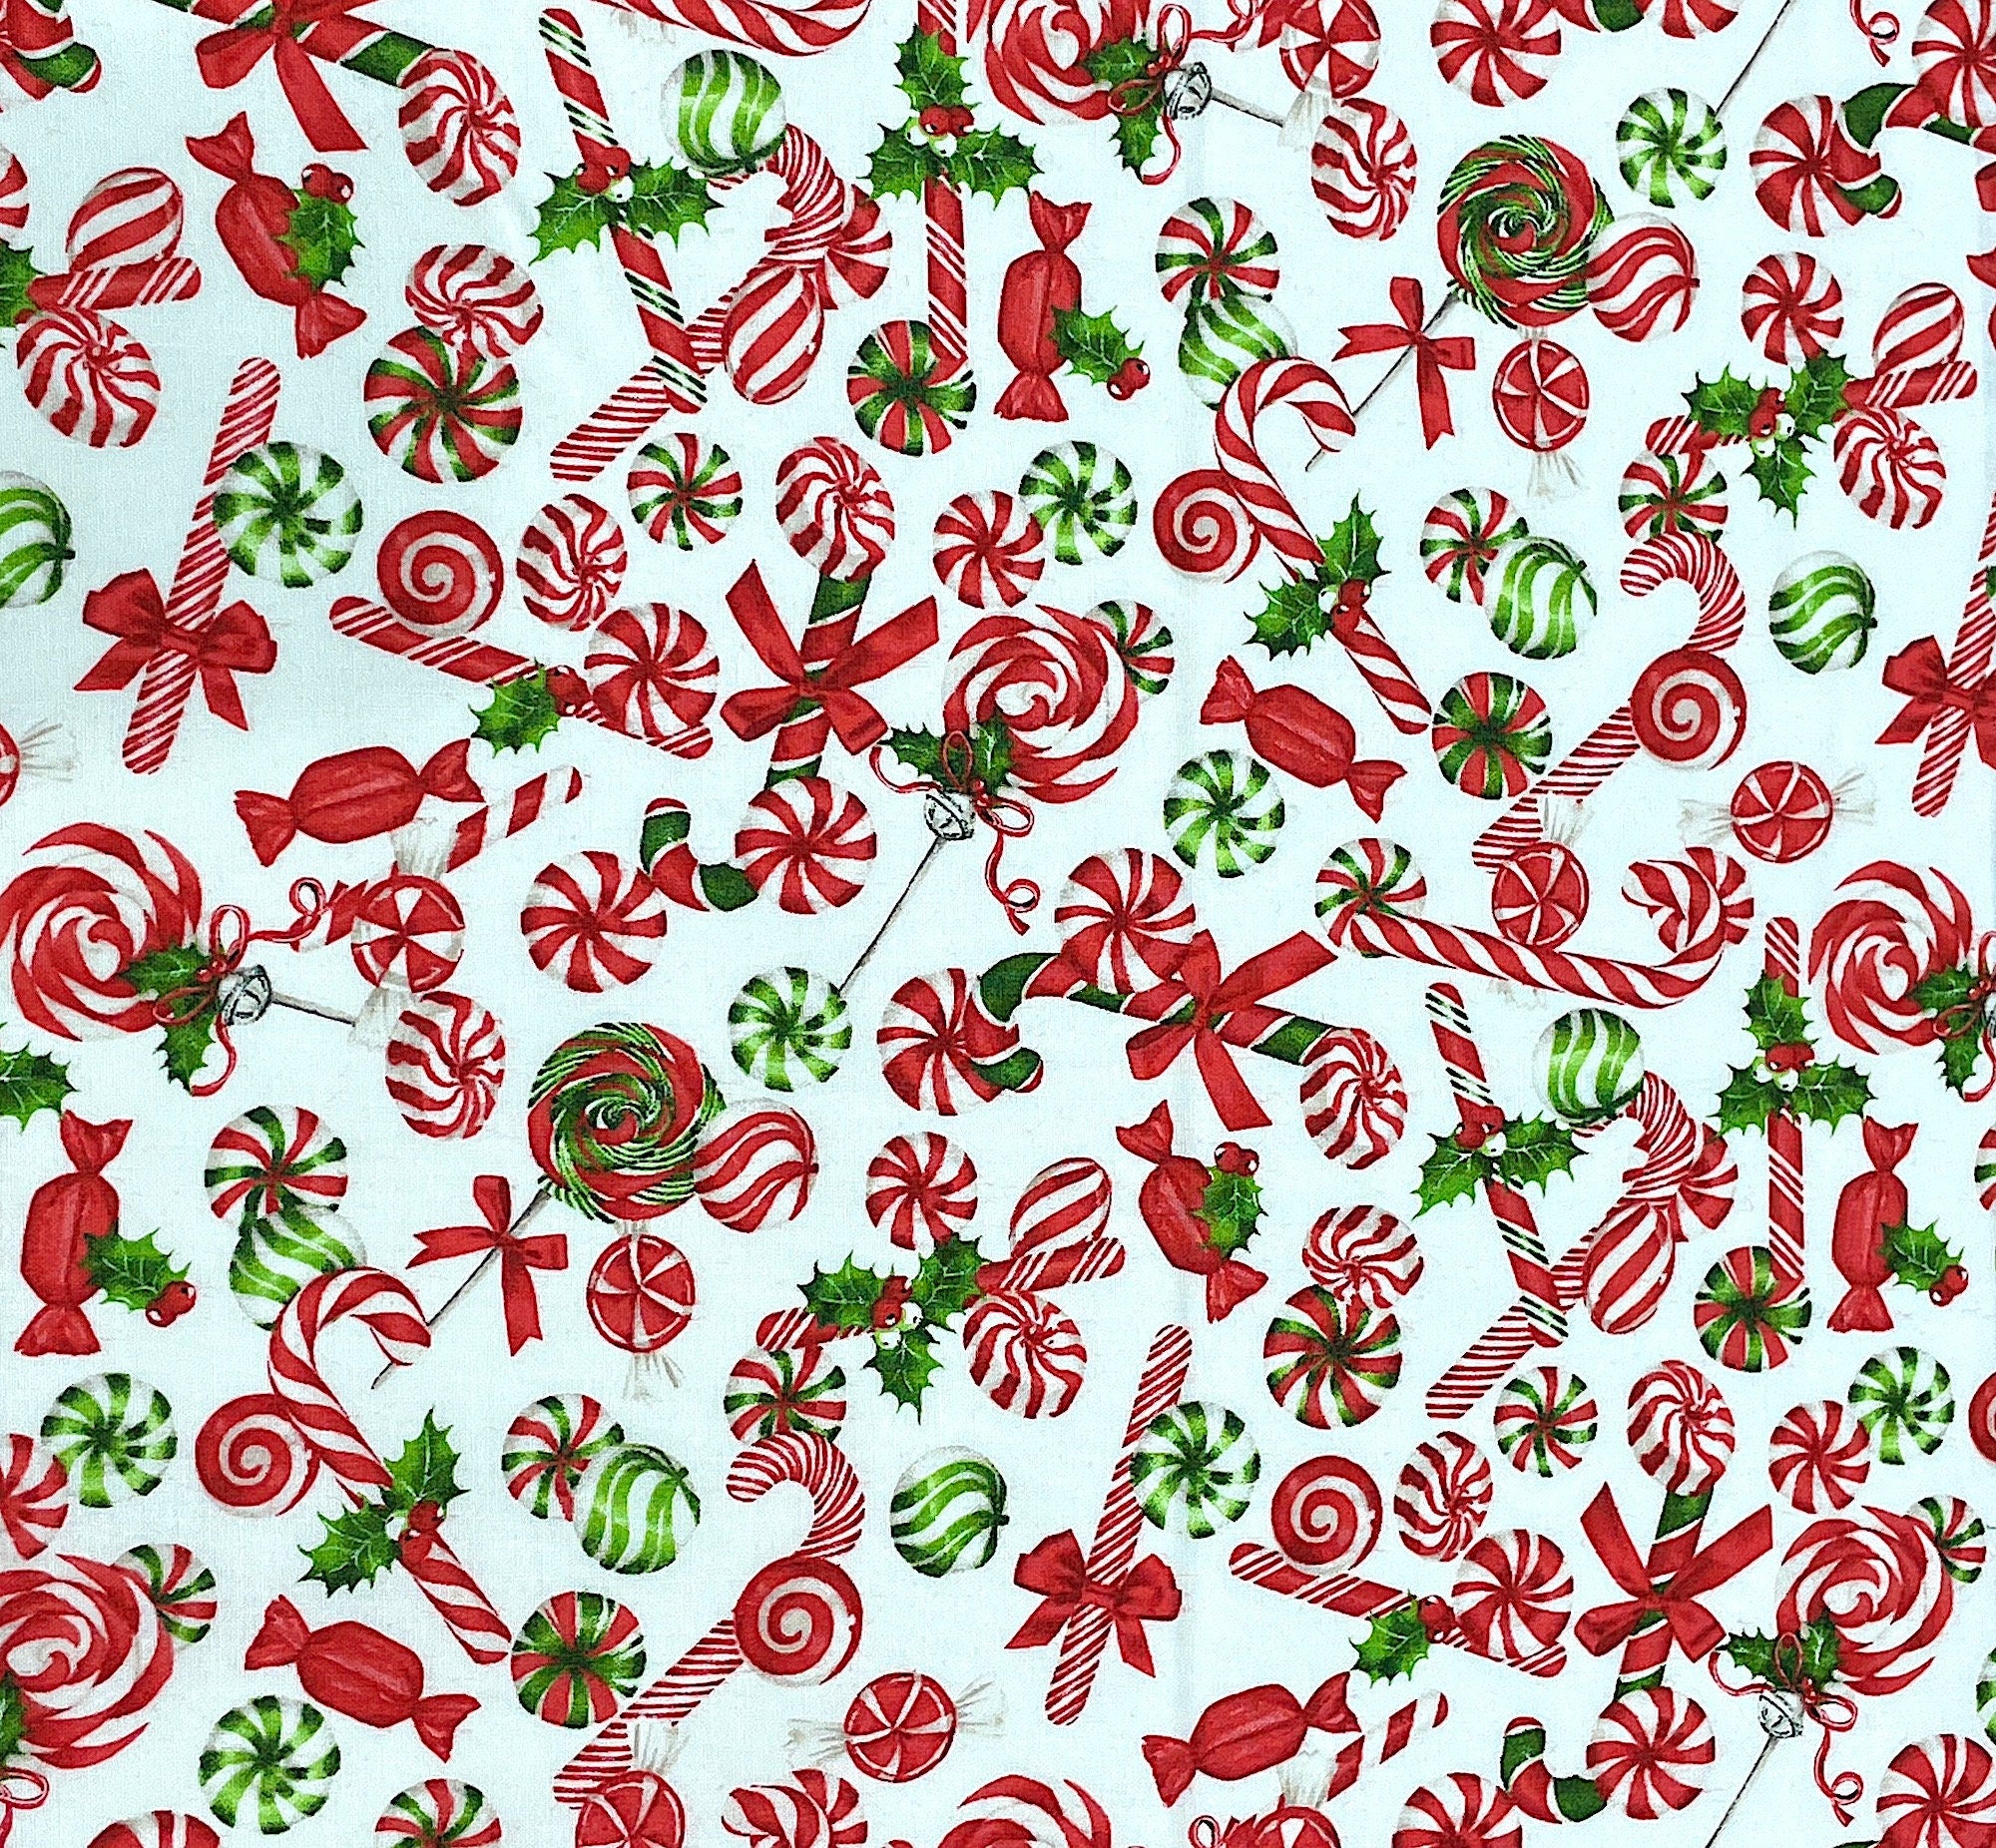 This fabric is called Peppermint Candy. This white fabric is covered with red, white and green peppermint candies. Some of the candies are candy canes, lollipops and candy pieces.